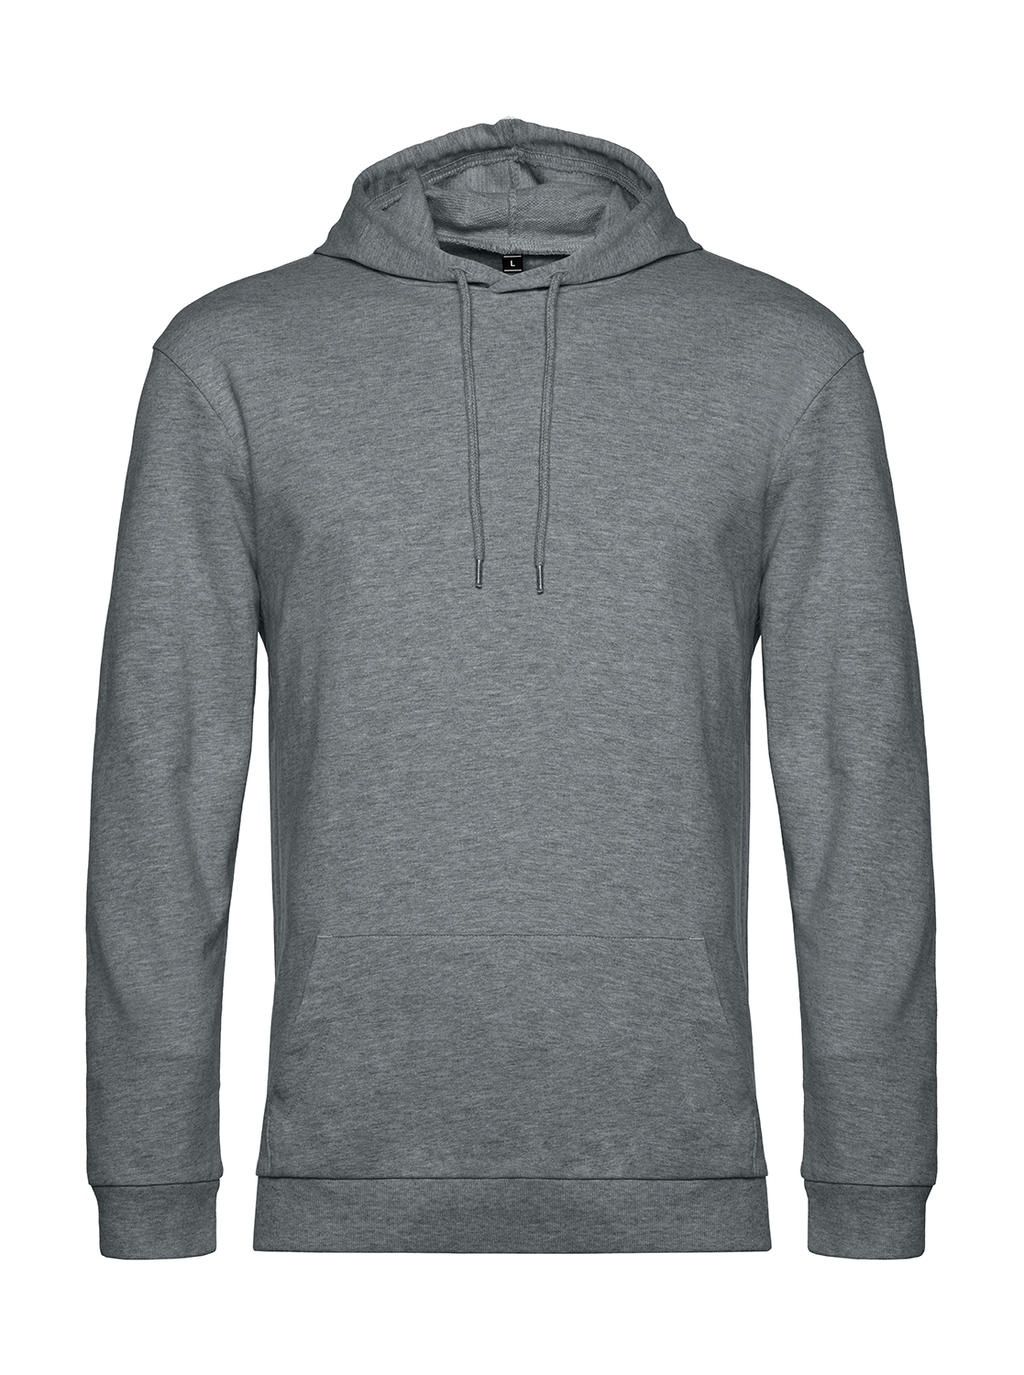 Mikina s kapucňou #Hoodie French Terry - heather mid grey